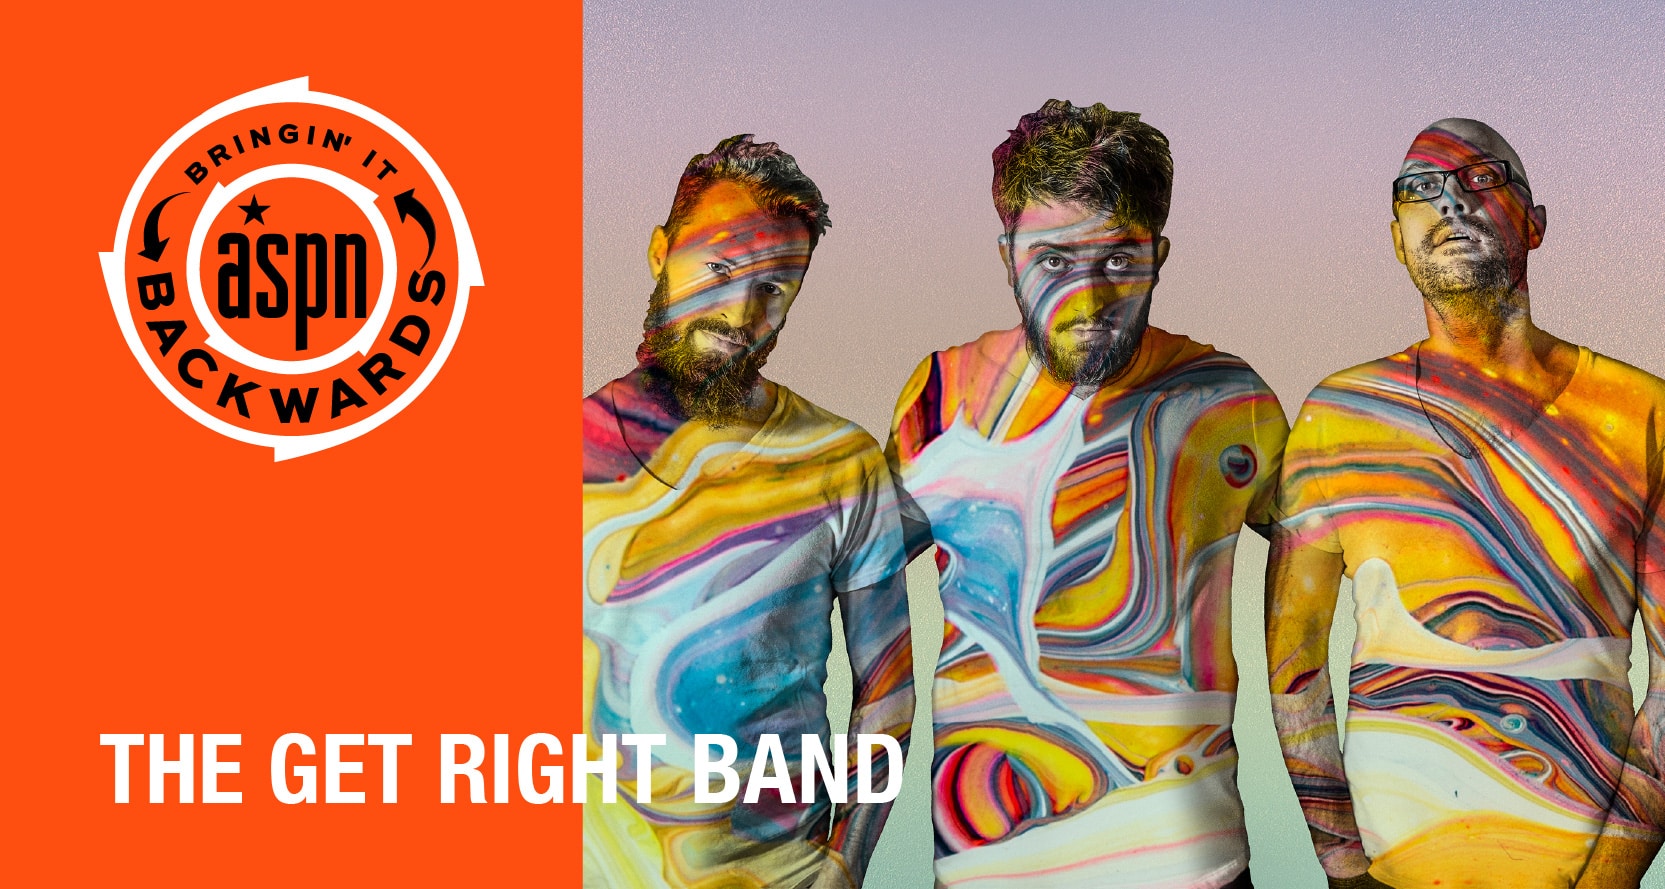 Bringin’ it Backwards: Interview with The Get Right Band